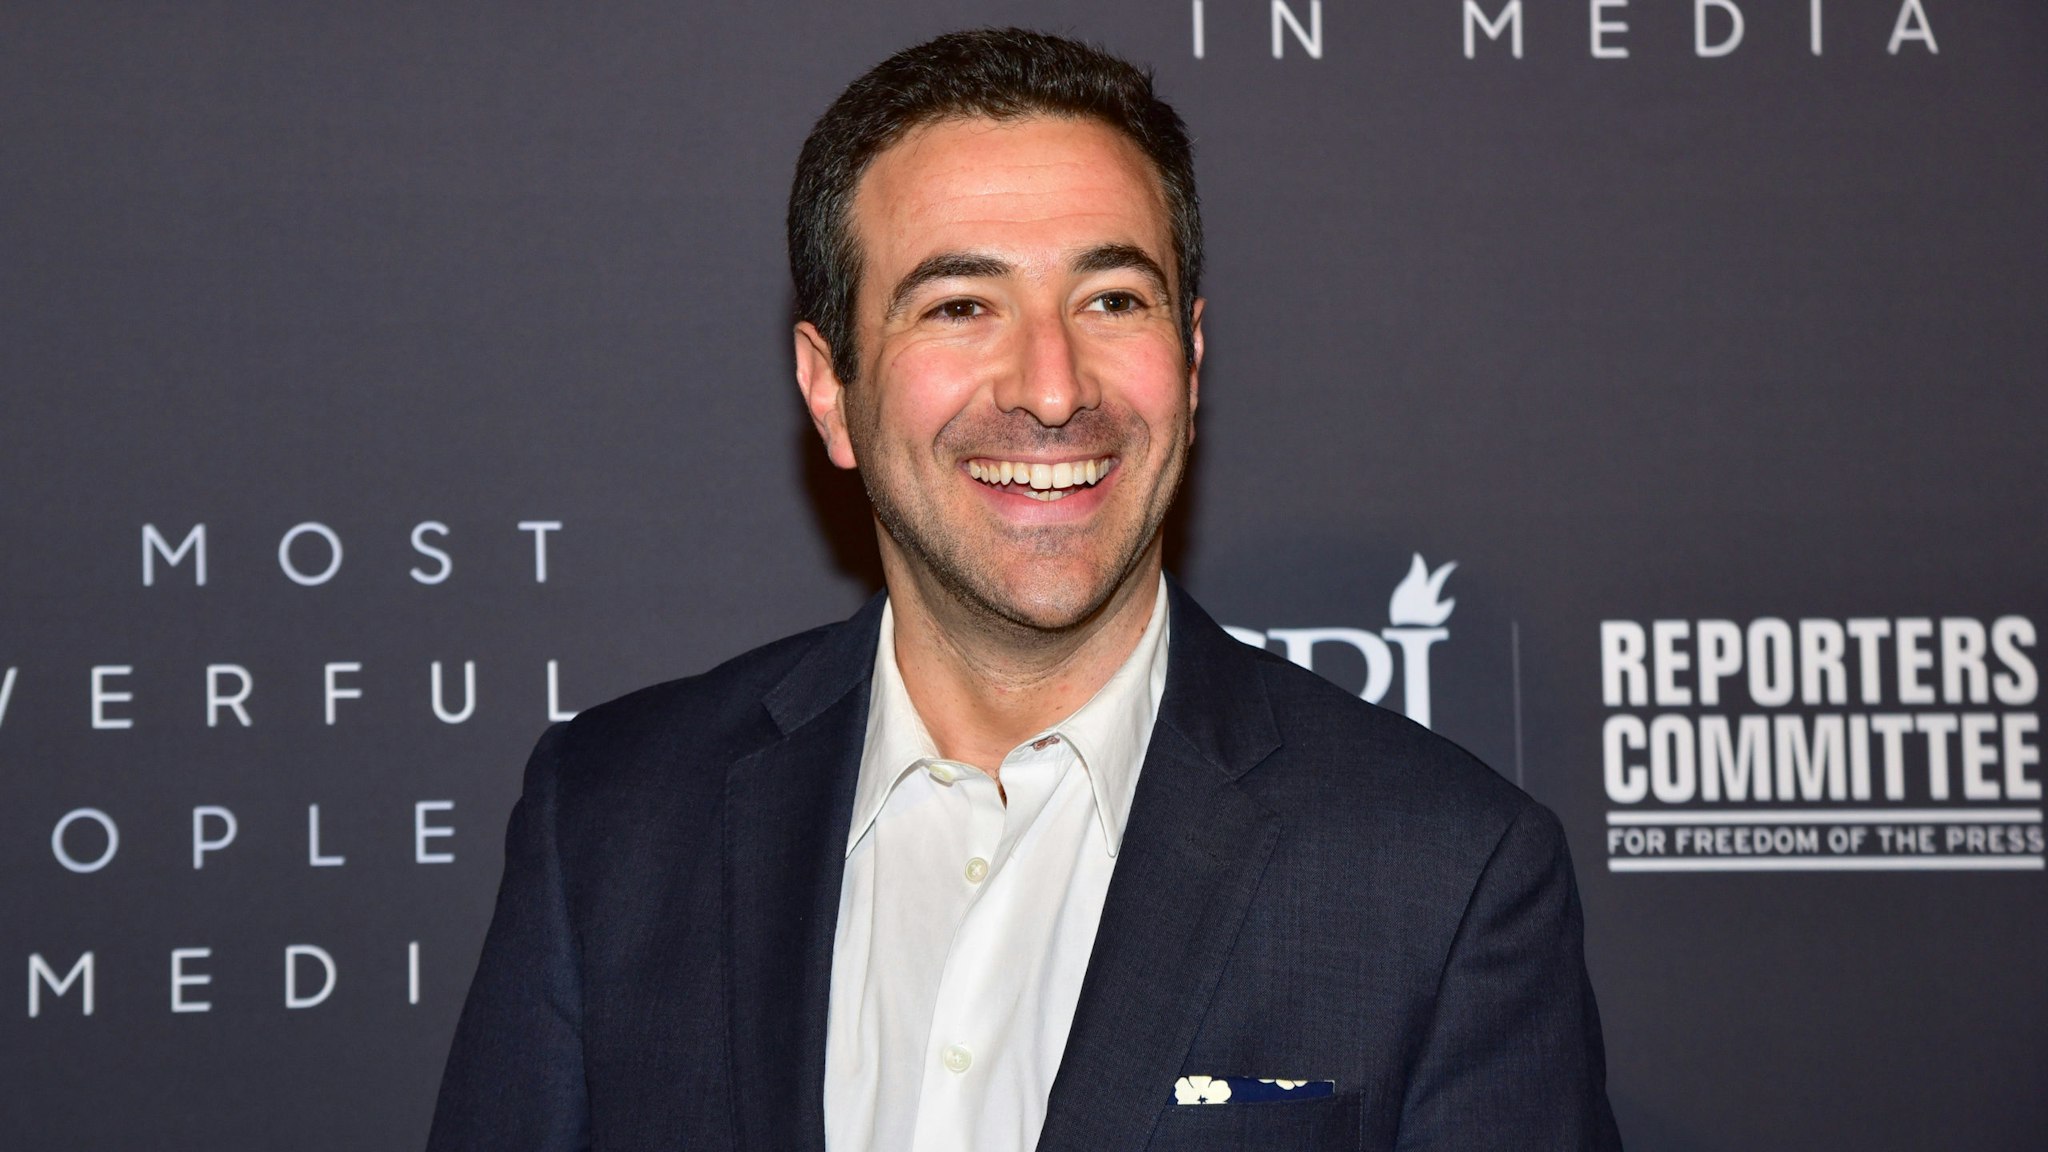 NEW YORK, NEW YORK - APRIL 11: Ari Melber attends The Hollywood Reporter Celebrates The Most Powerful People In Media at The Pool on April 11, 2019 in New York City.